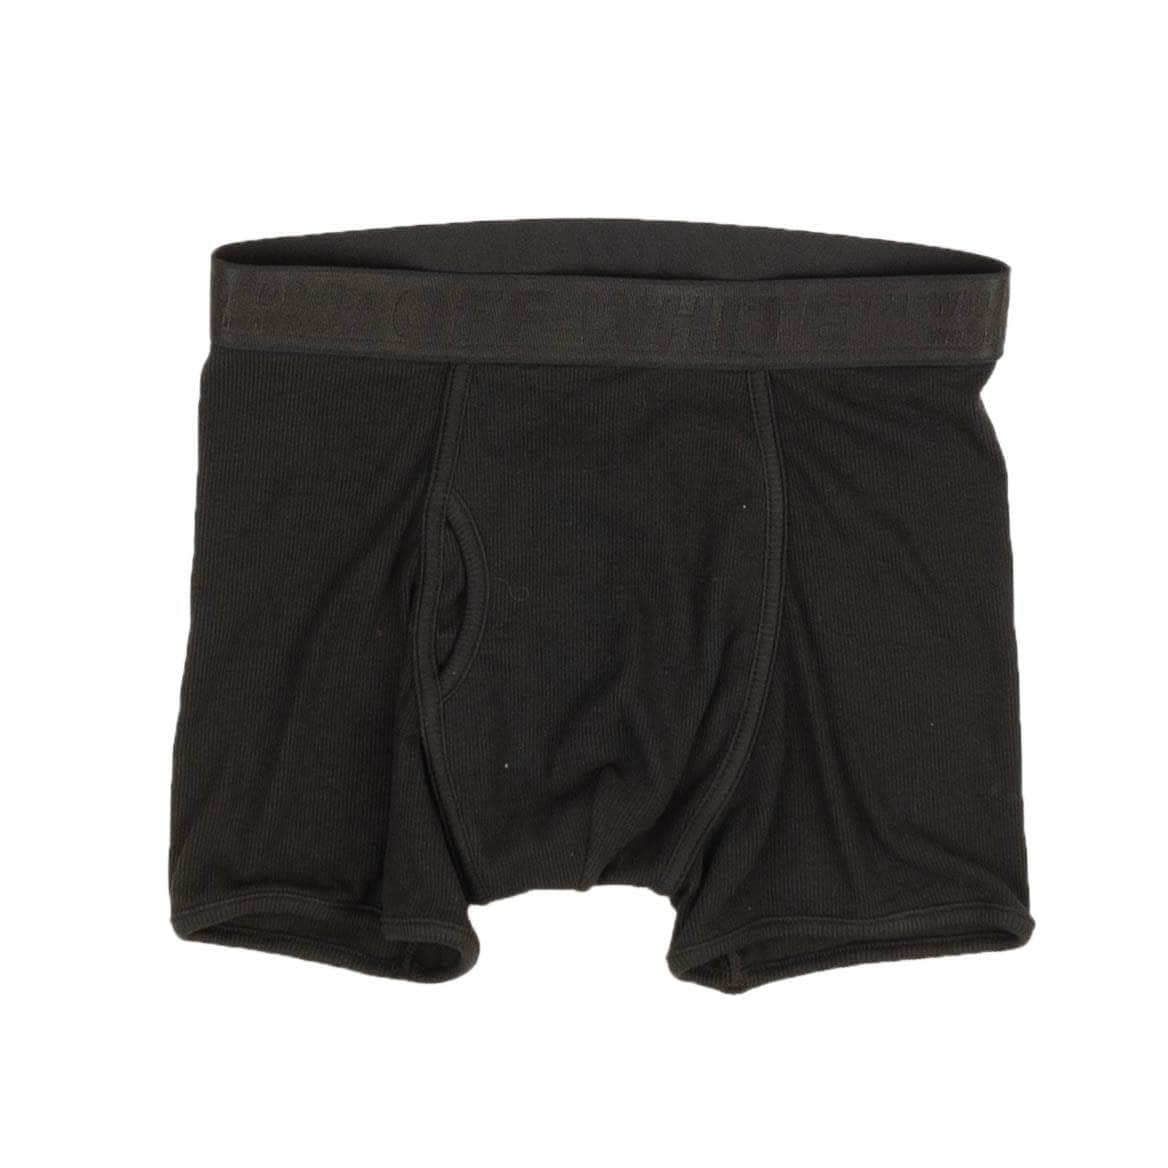 OFF-WHITE c/o VIRGIL ABLOH channelenable-all, chicmi, couponcollection, gender-mens, main-clothing, mens-shoes, mens-underwear, off-white-c-o-virgil-abloh, OWM, size-m, size-xl, under-250 Black Logo Band Underwear Briefs